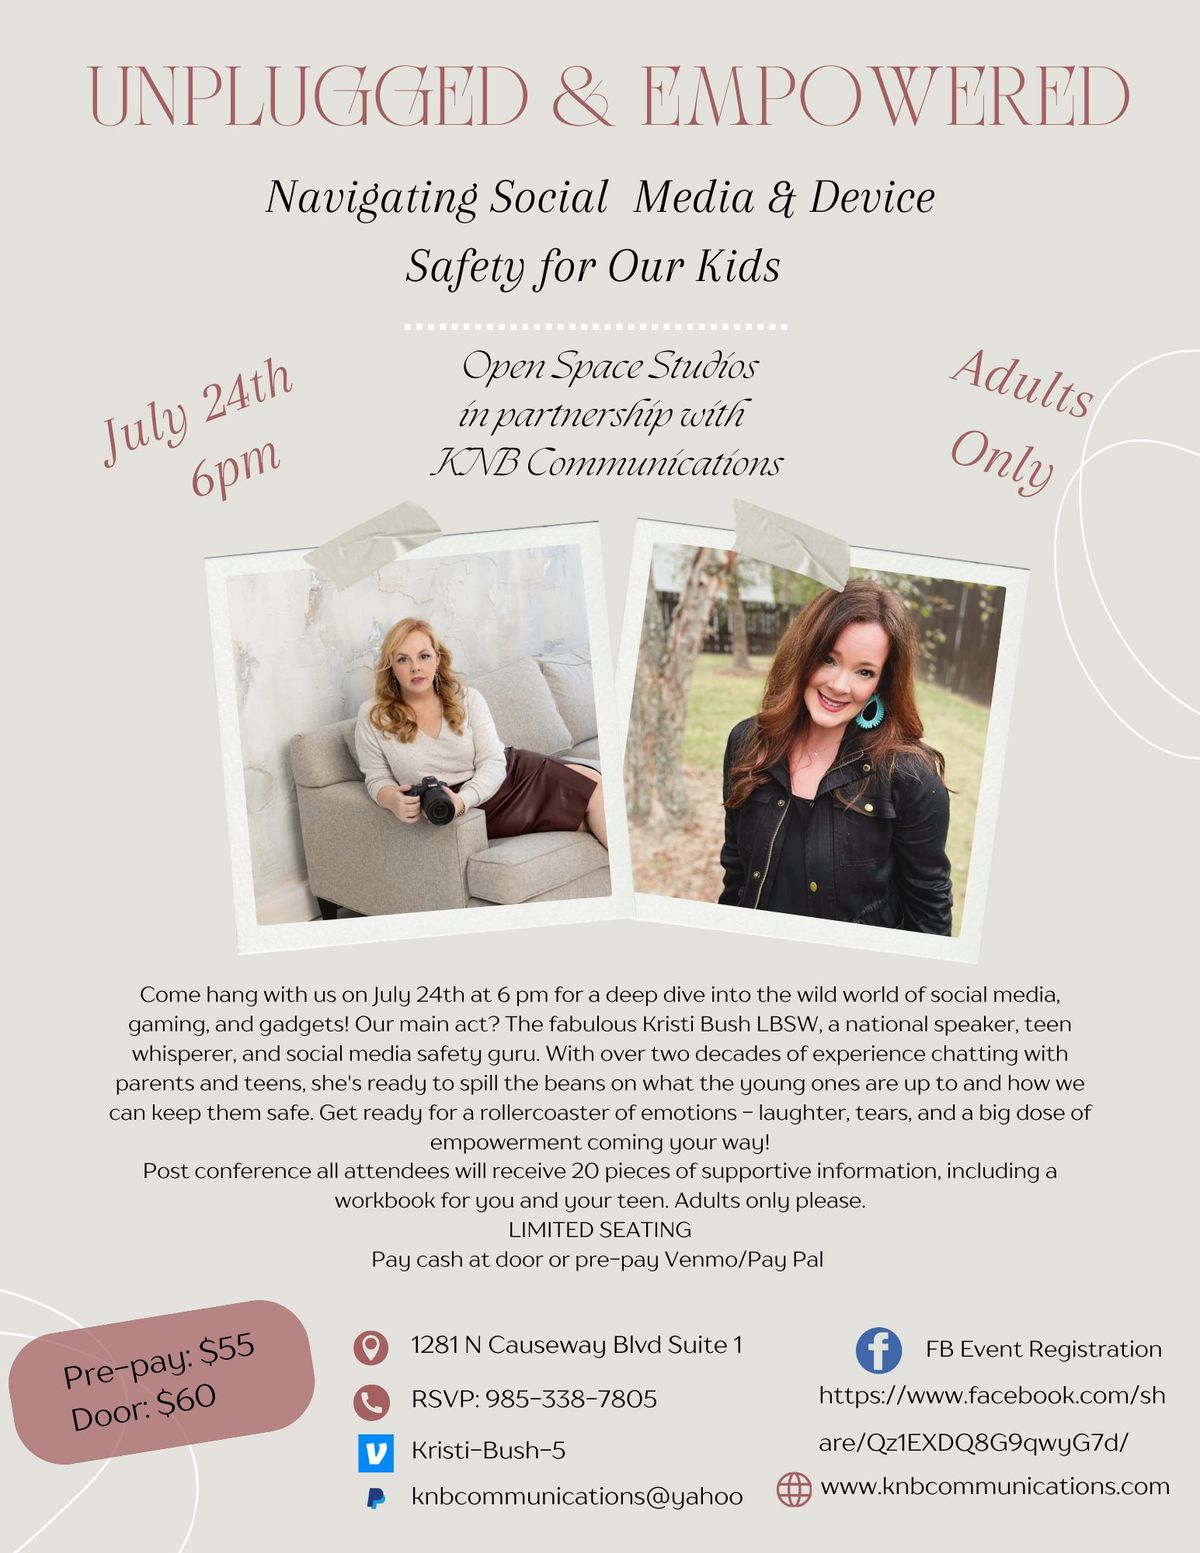 Unplugged & Empowered: Navigating Social Media & Device Safety for Kids